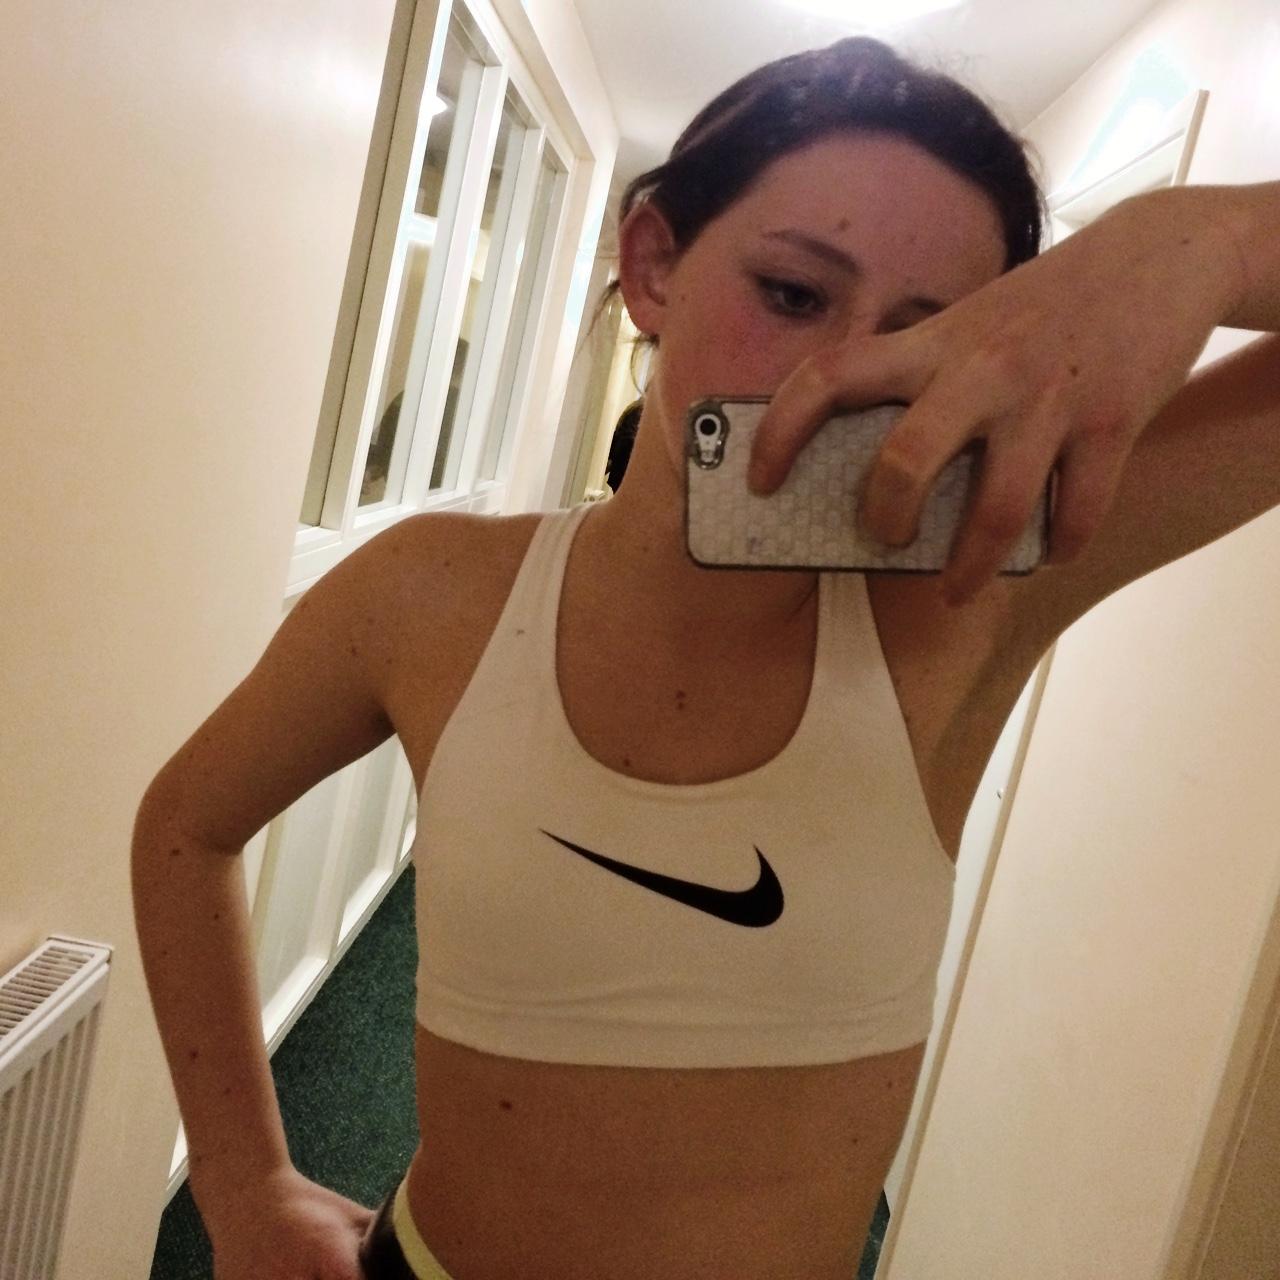 brand new white Nike sports bra. Still with tags on - Depop